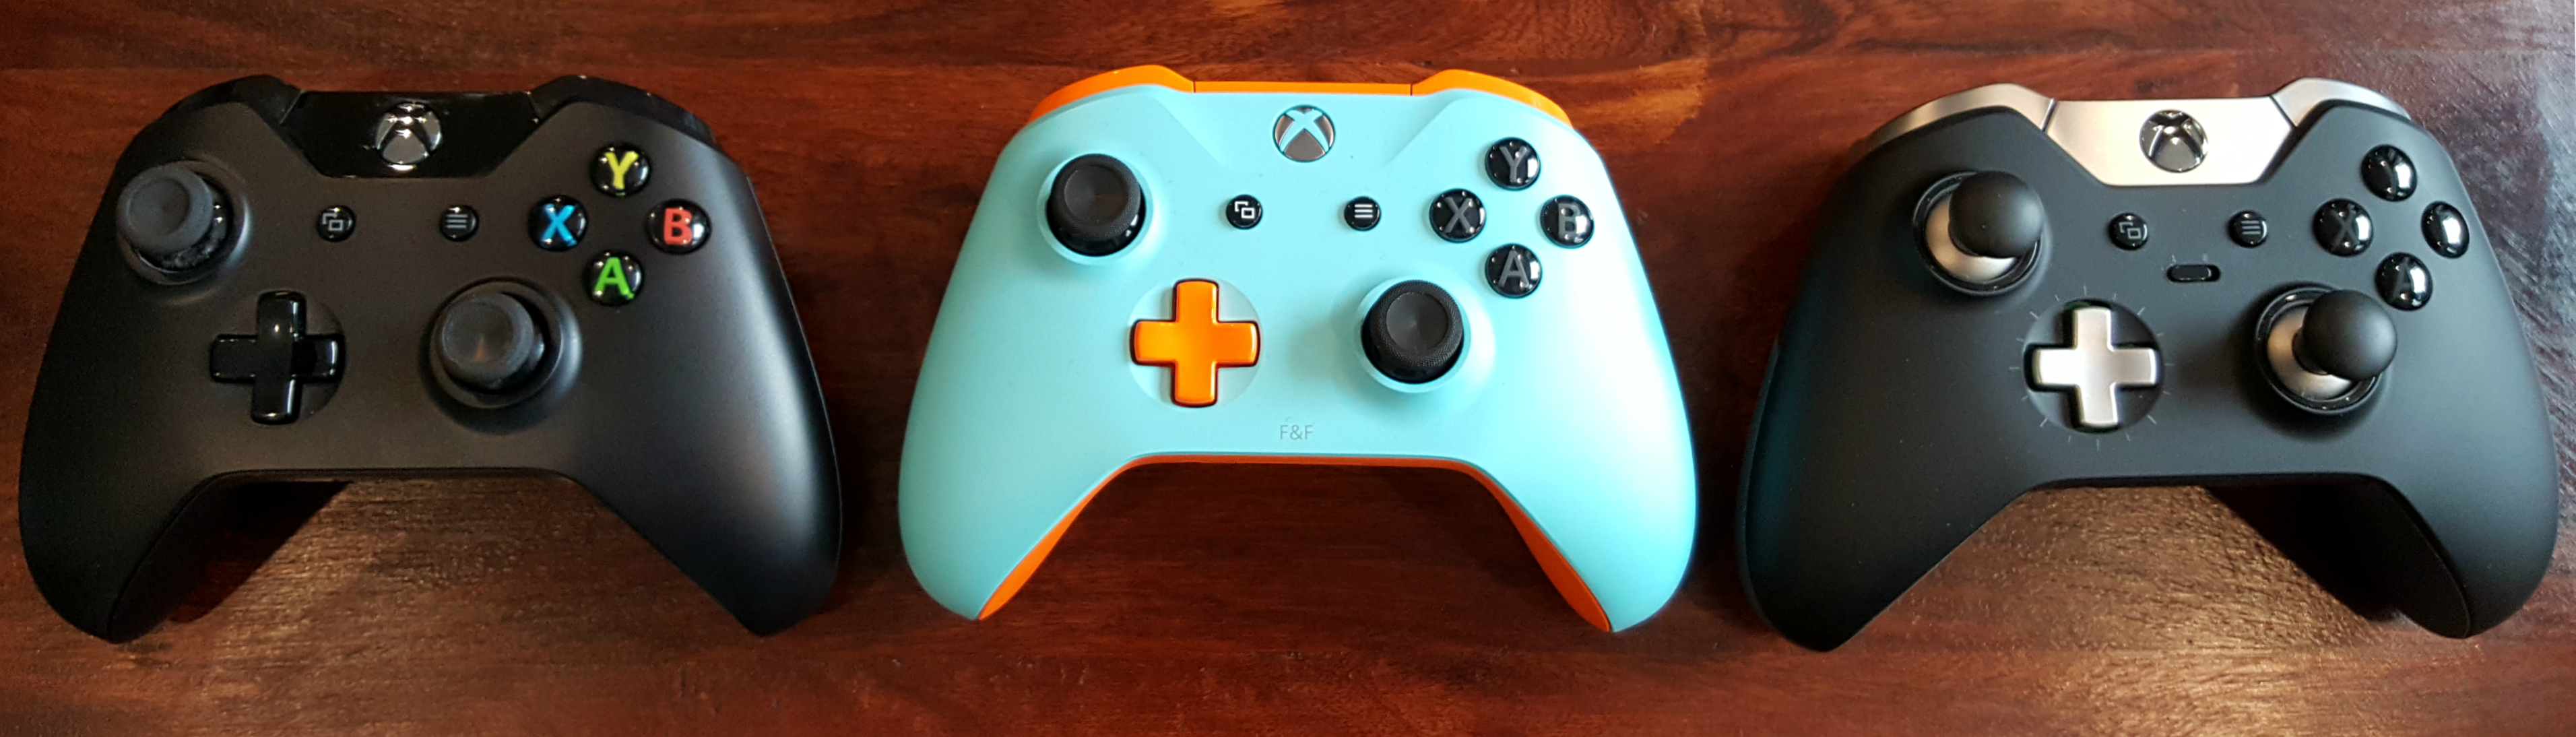 xbox one s controller v2